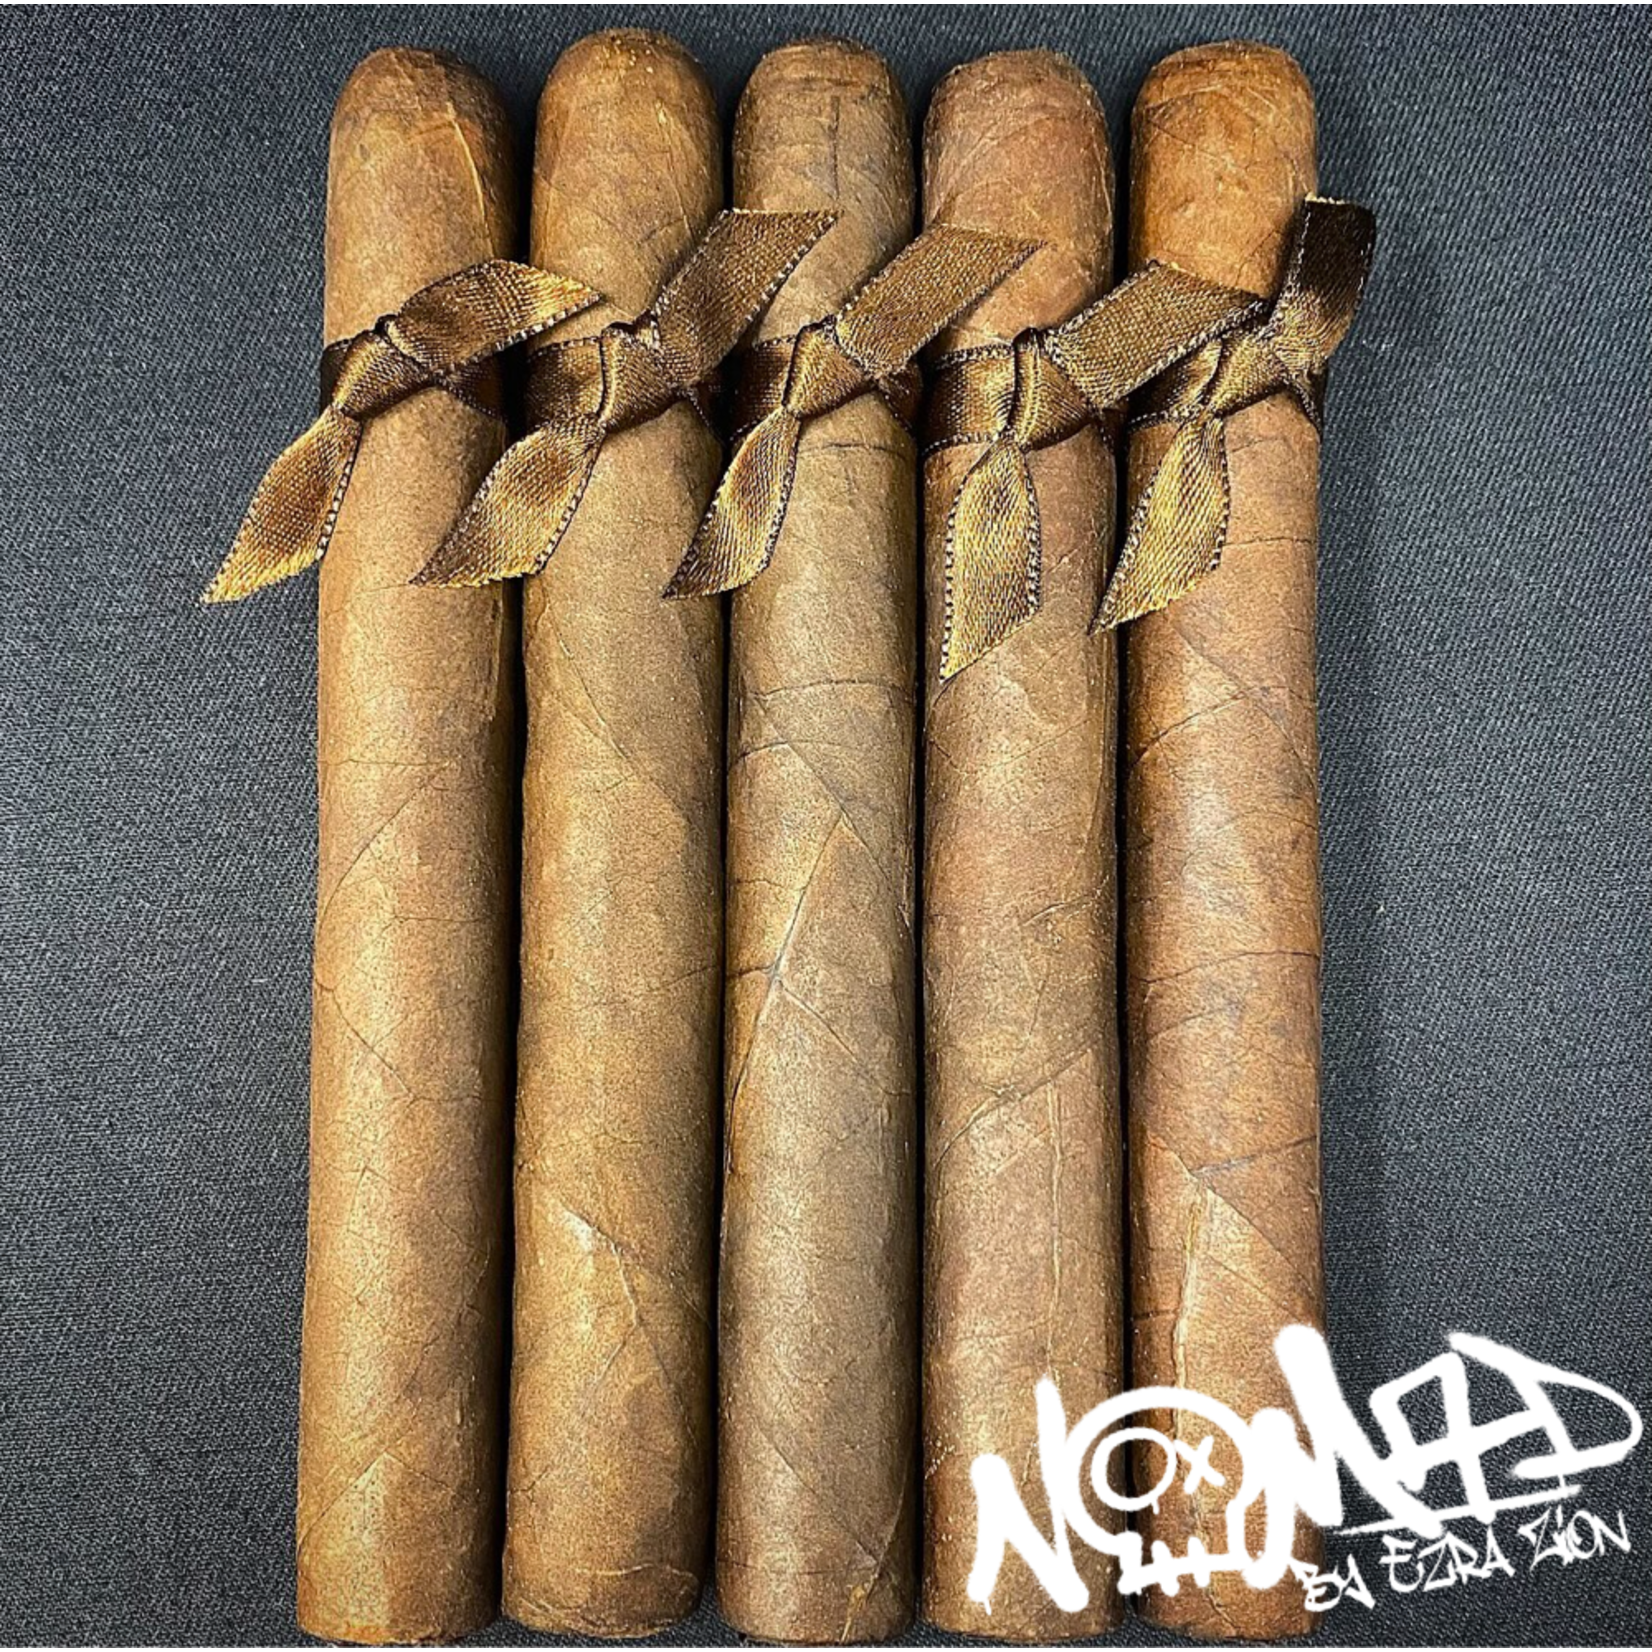 Nomad Cigars Homemade Chocolate Cake by Nomad